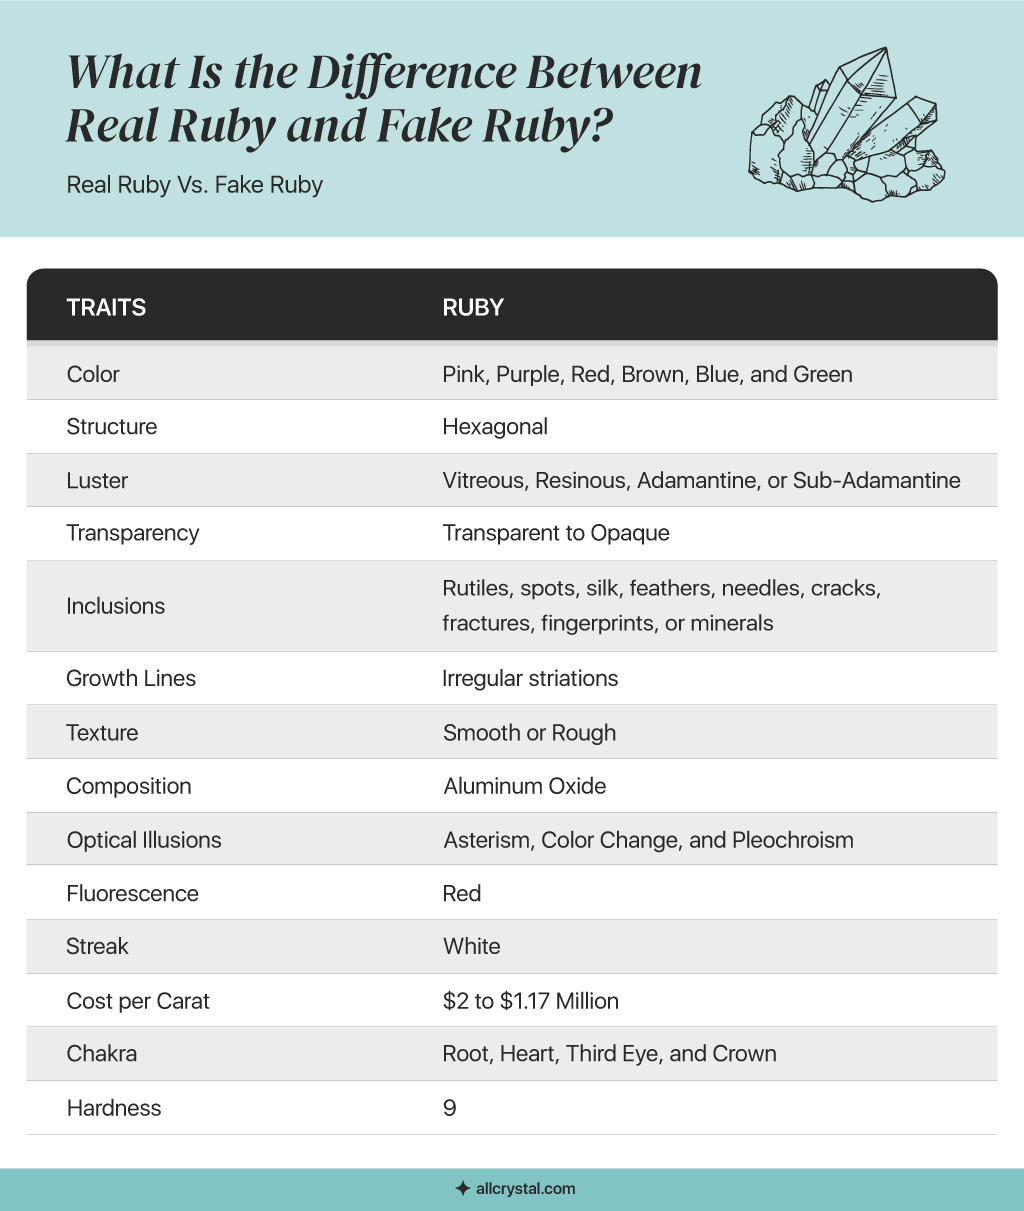 A custom graphic comparison for the traits of a real ruby